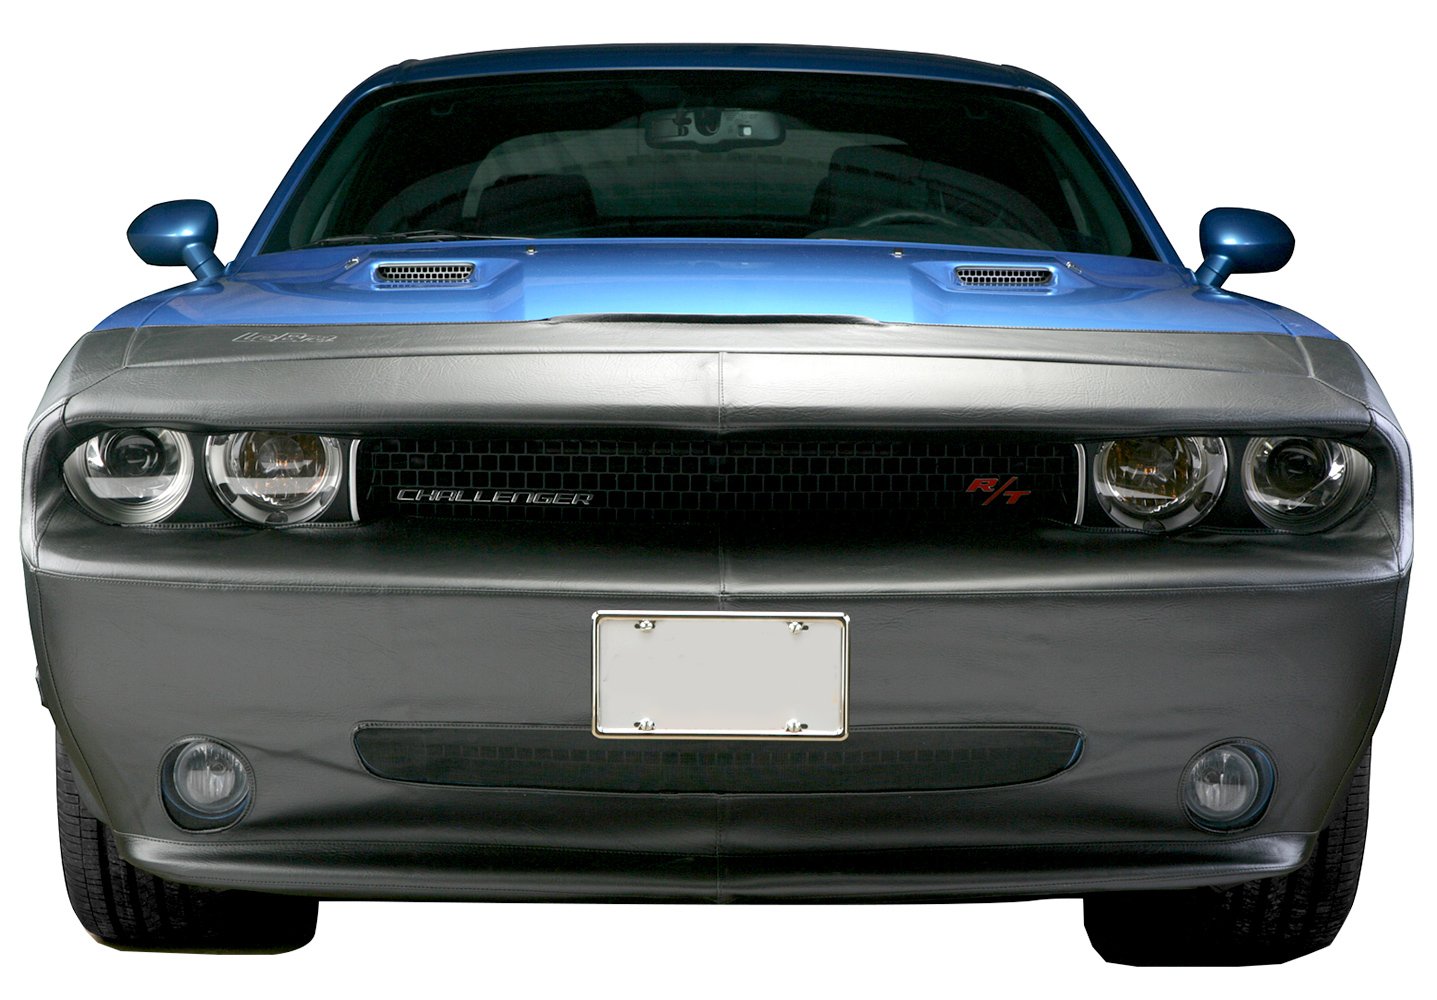 LeBra 551346-01 Each LeBra is specifically designed to your exact vehicle model Front End Bra LeBra Custom Front End Cover If your model has fog lights special air-intakes or even pop-up headlights there is a LeBra for you 